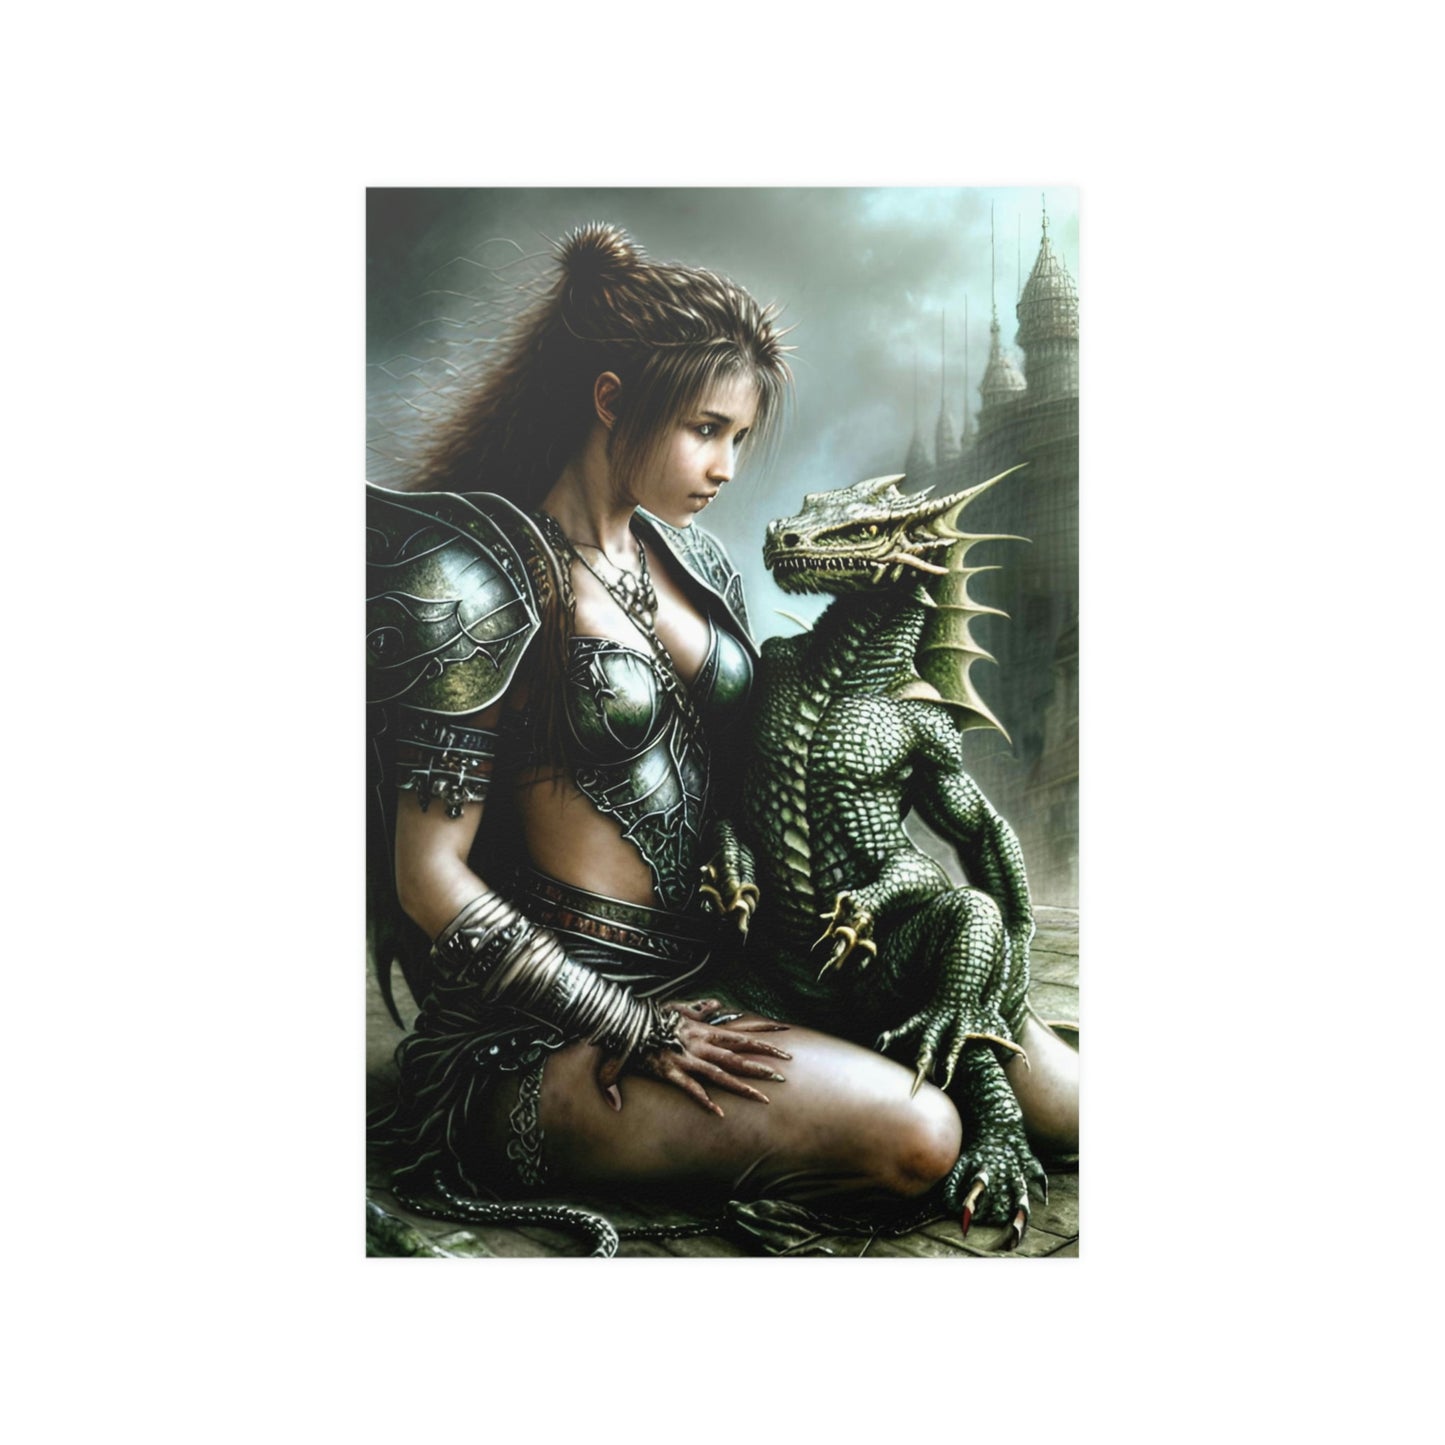 Baby dragon 25 Satin Posters (210gsm)